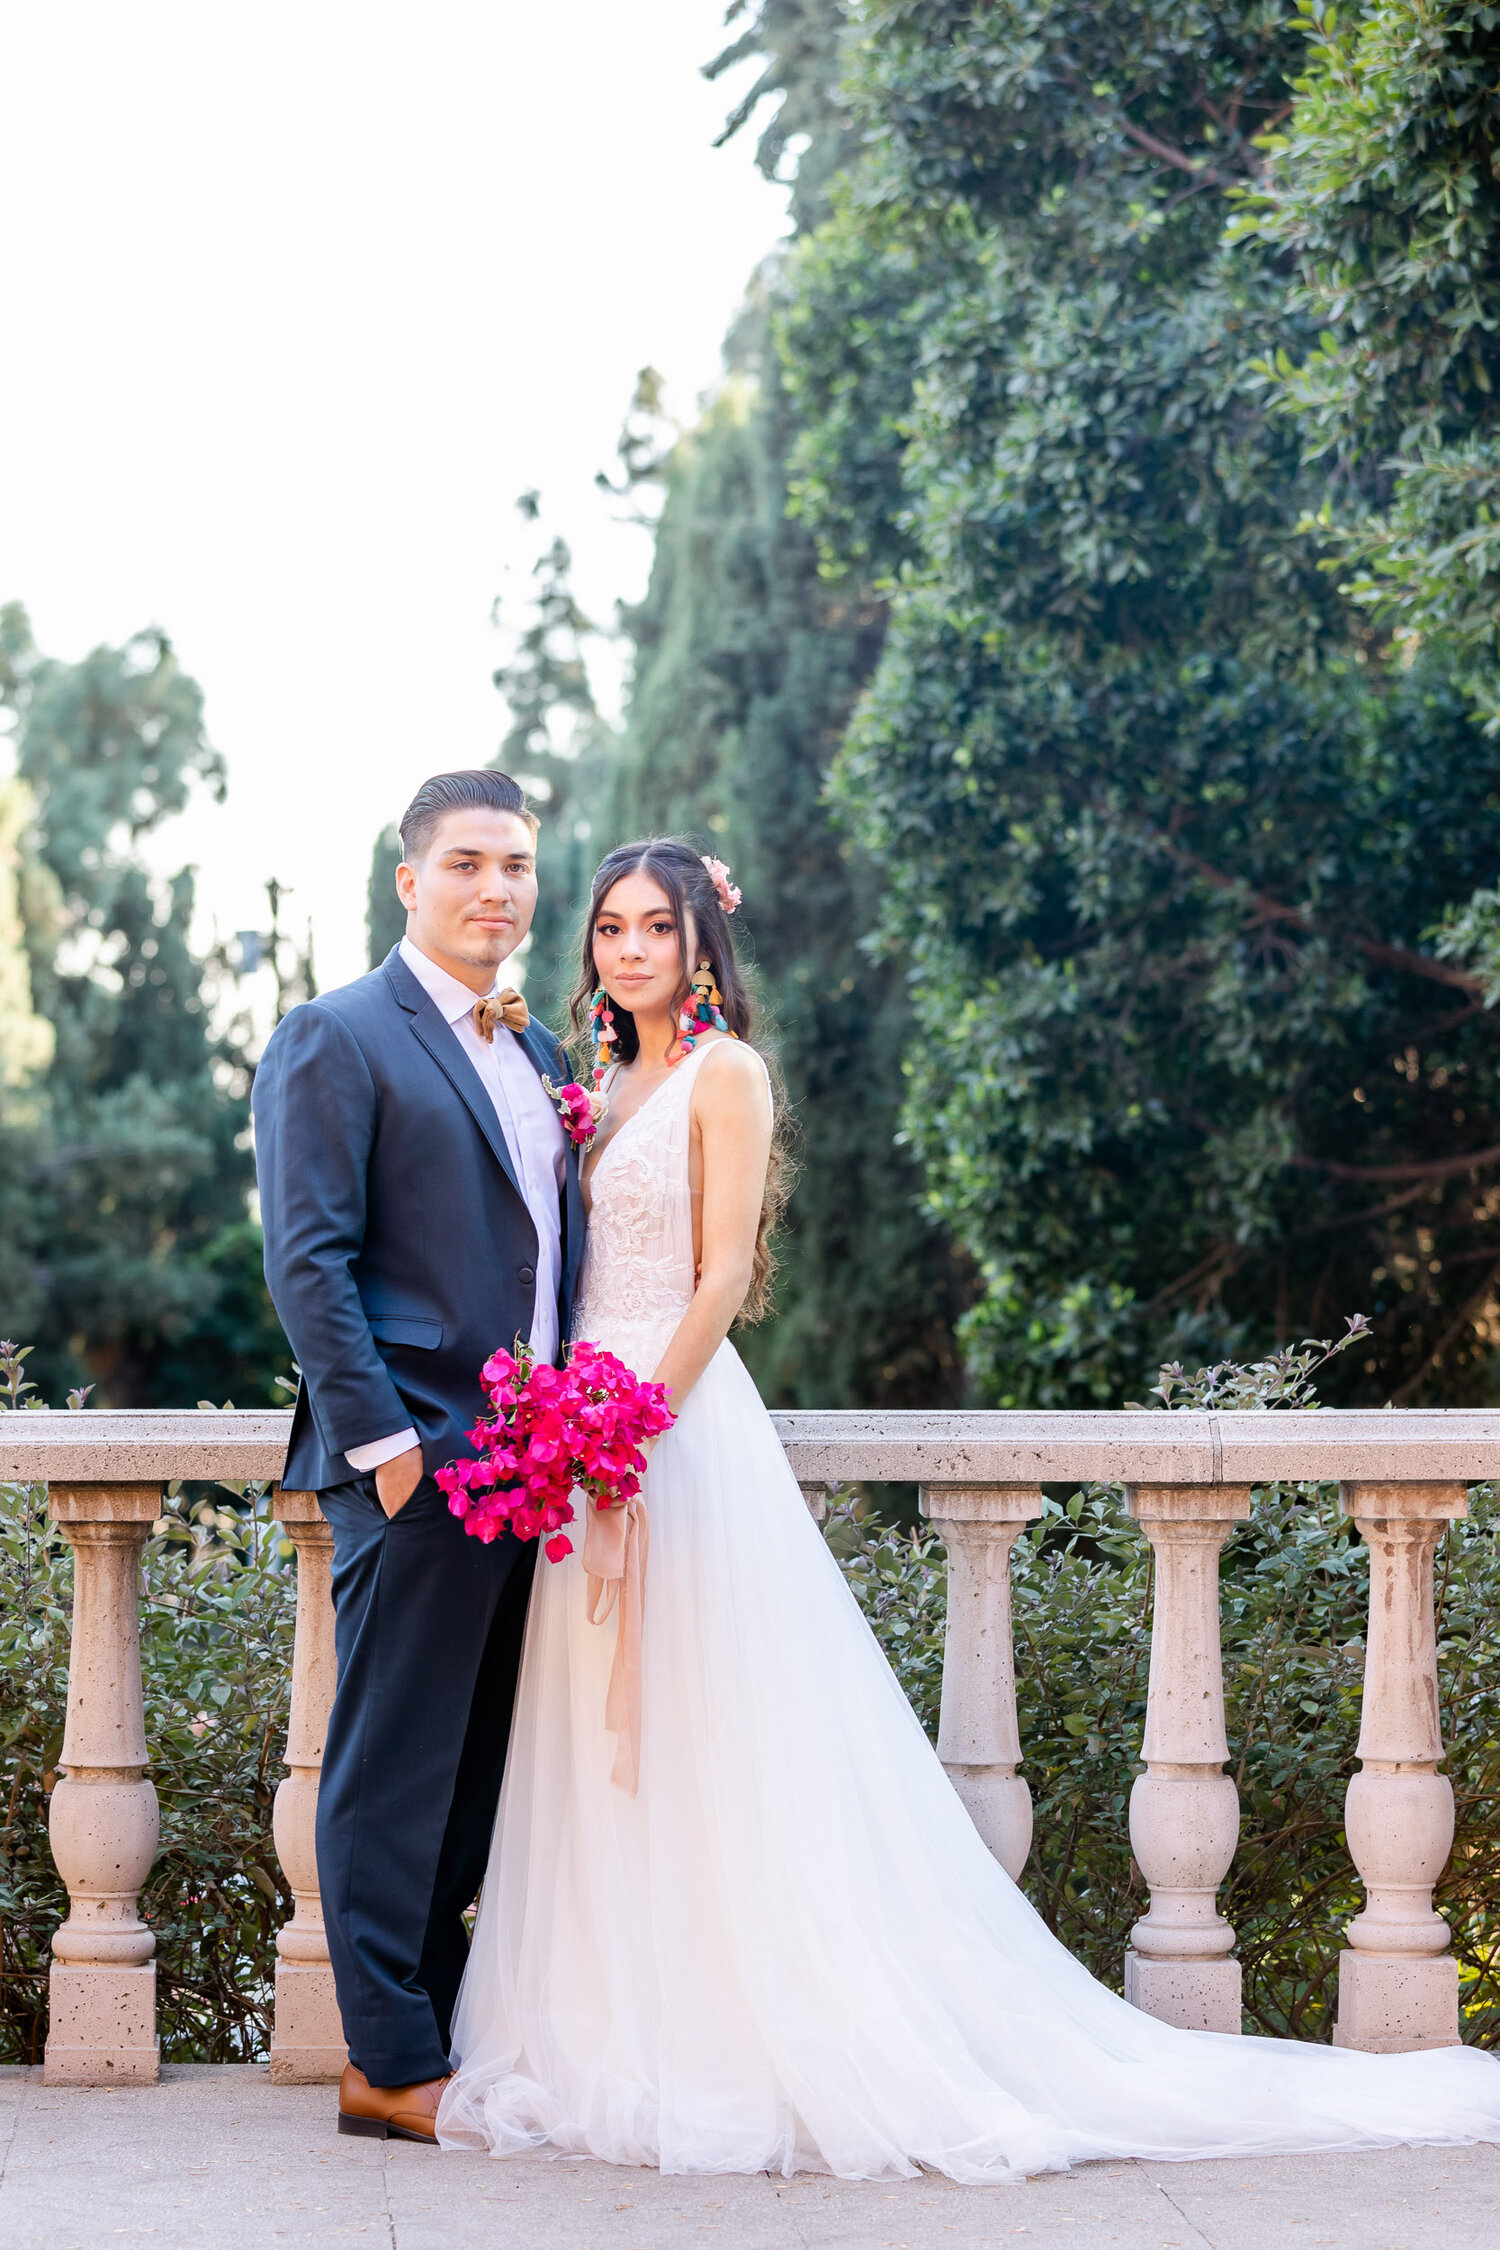 h & l lovely creations bespoke weddings southern california colourful 00026